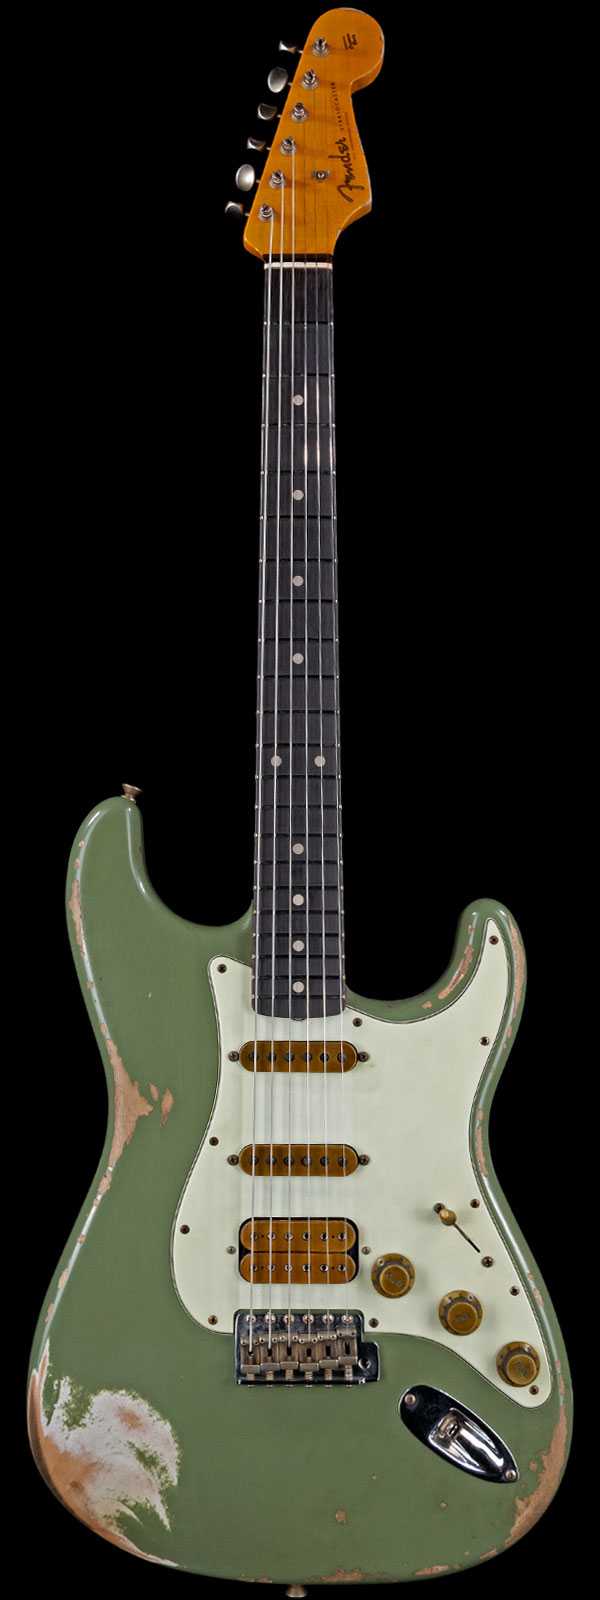 Fender Custom Shop Alley Cat 2.0 Stratocaster Heavy Relic HSS Rosewood Board Vintage Trem Faded Drab Green